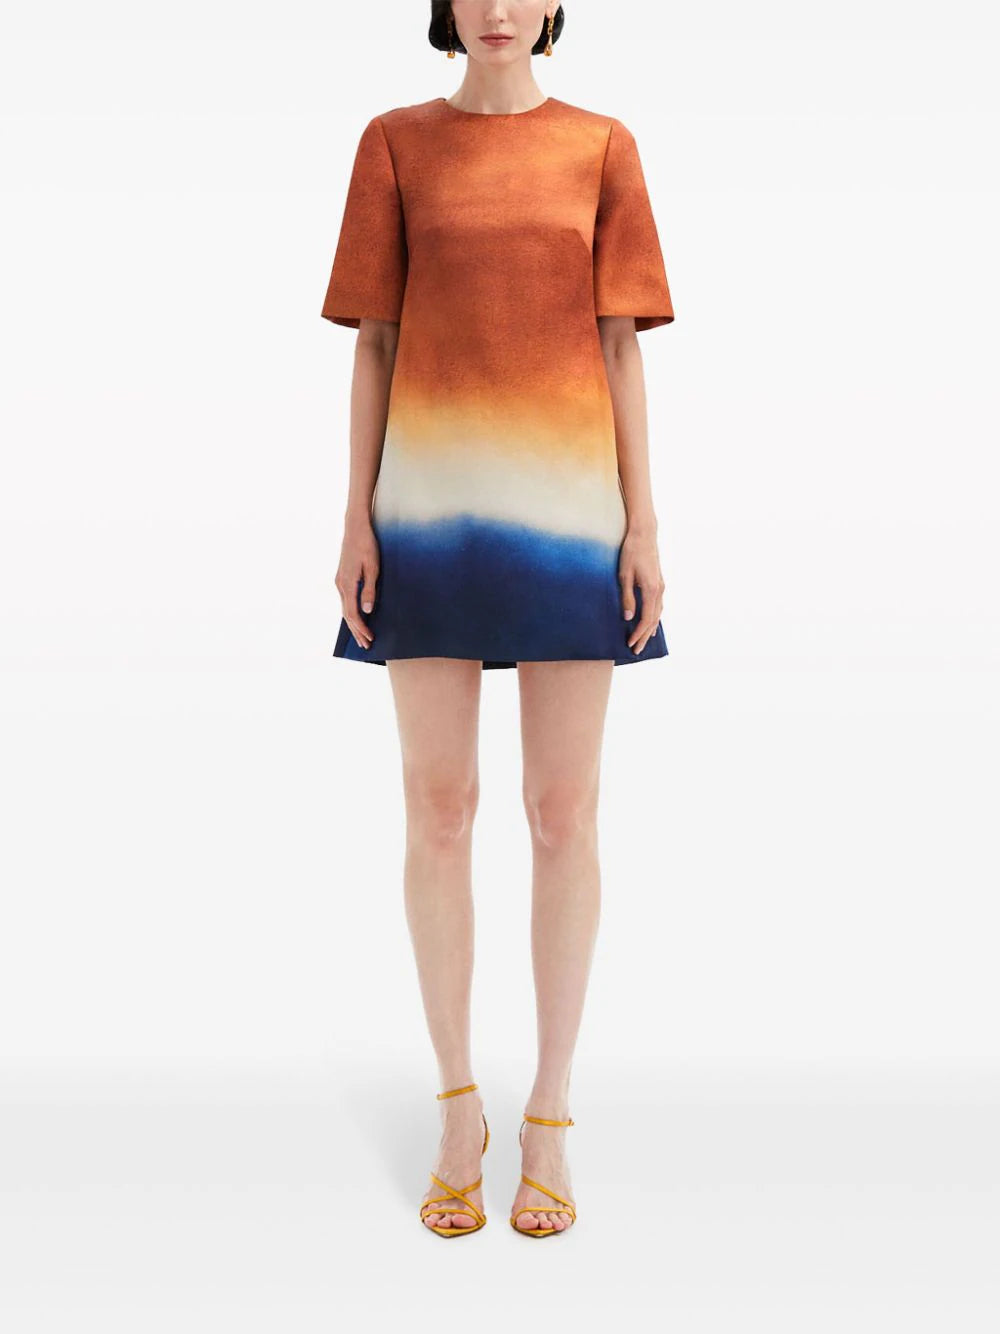 ABSTRACT OMBRÉ SHIFT DRESS - Canyon/Navy